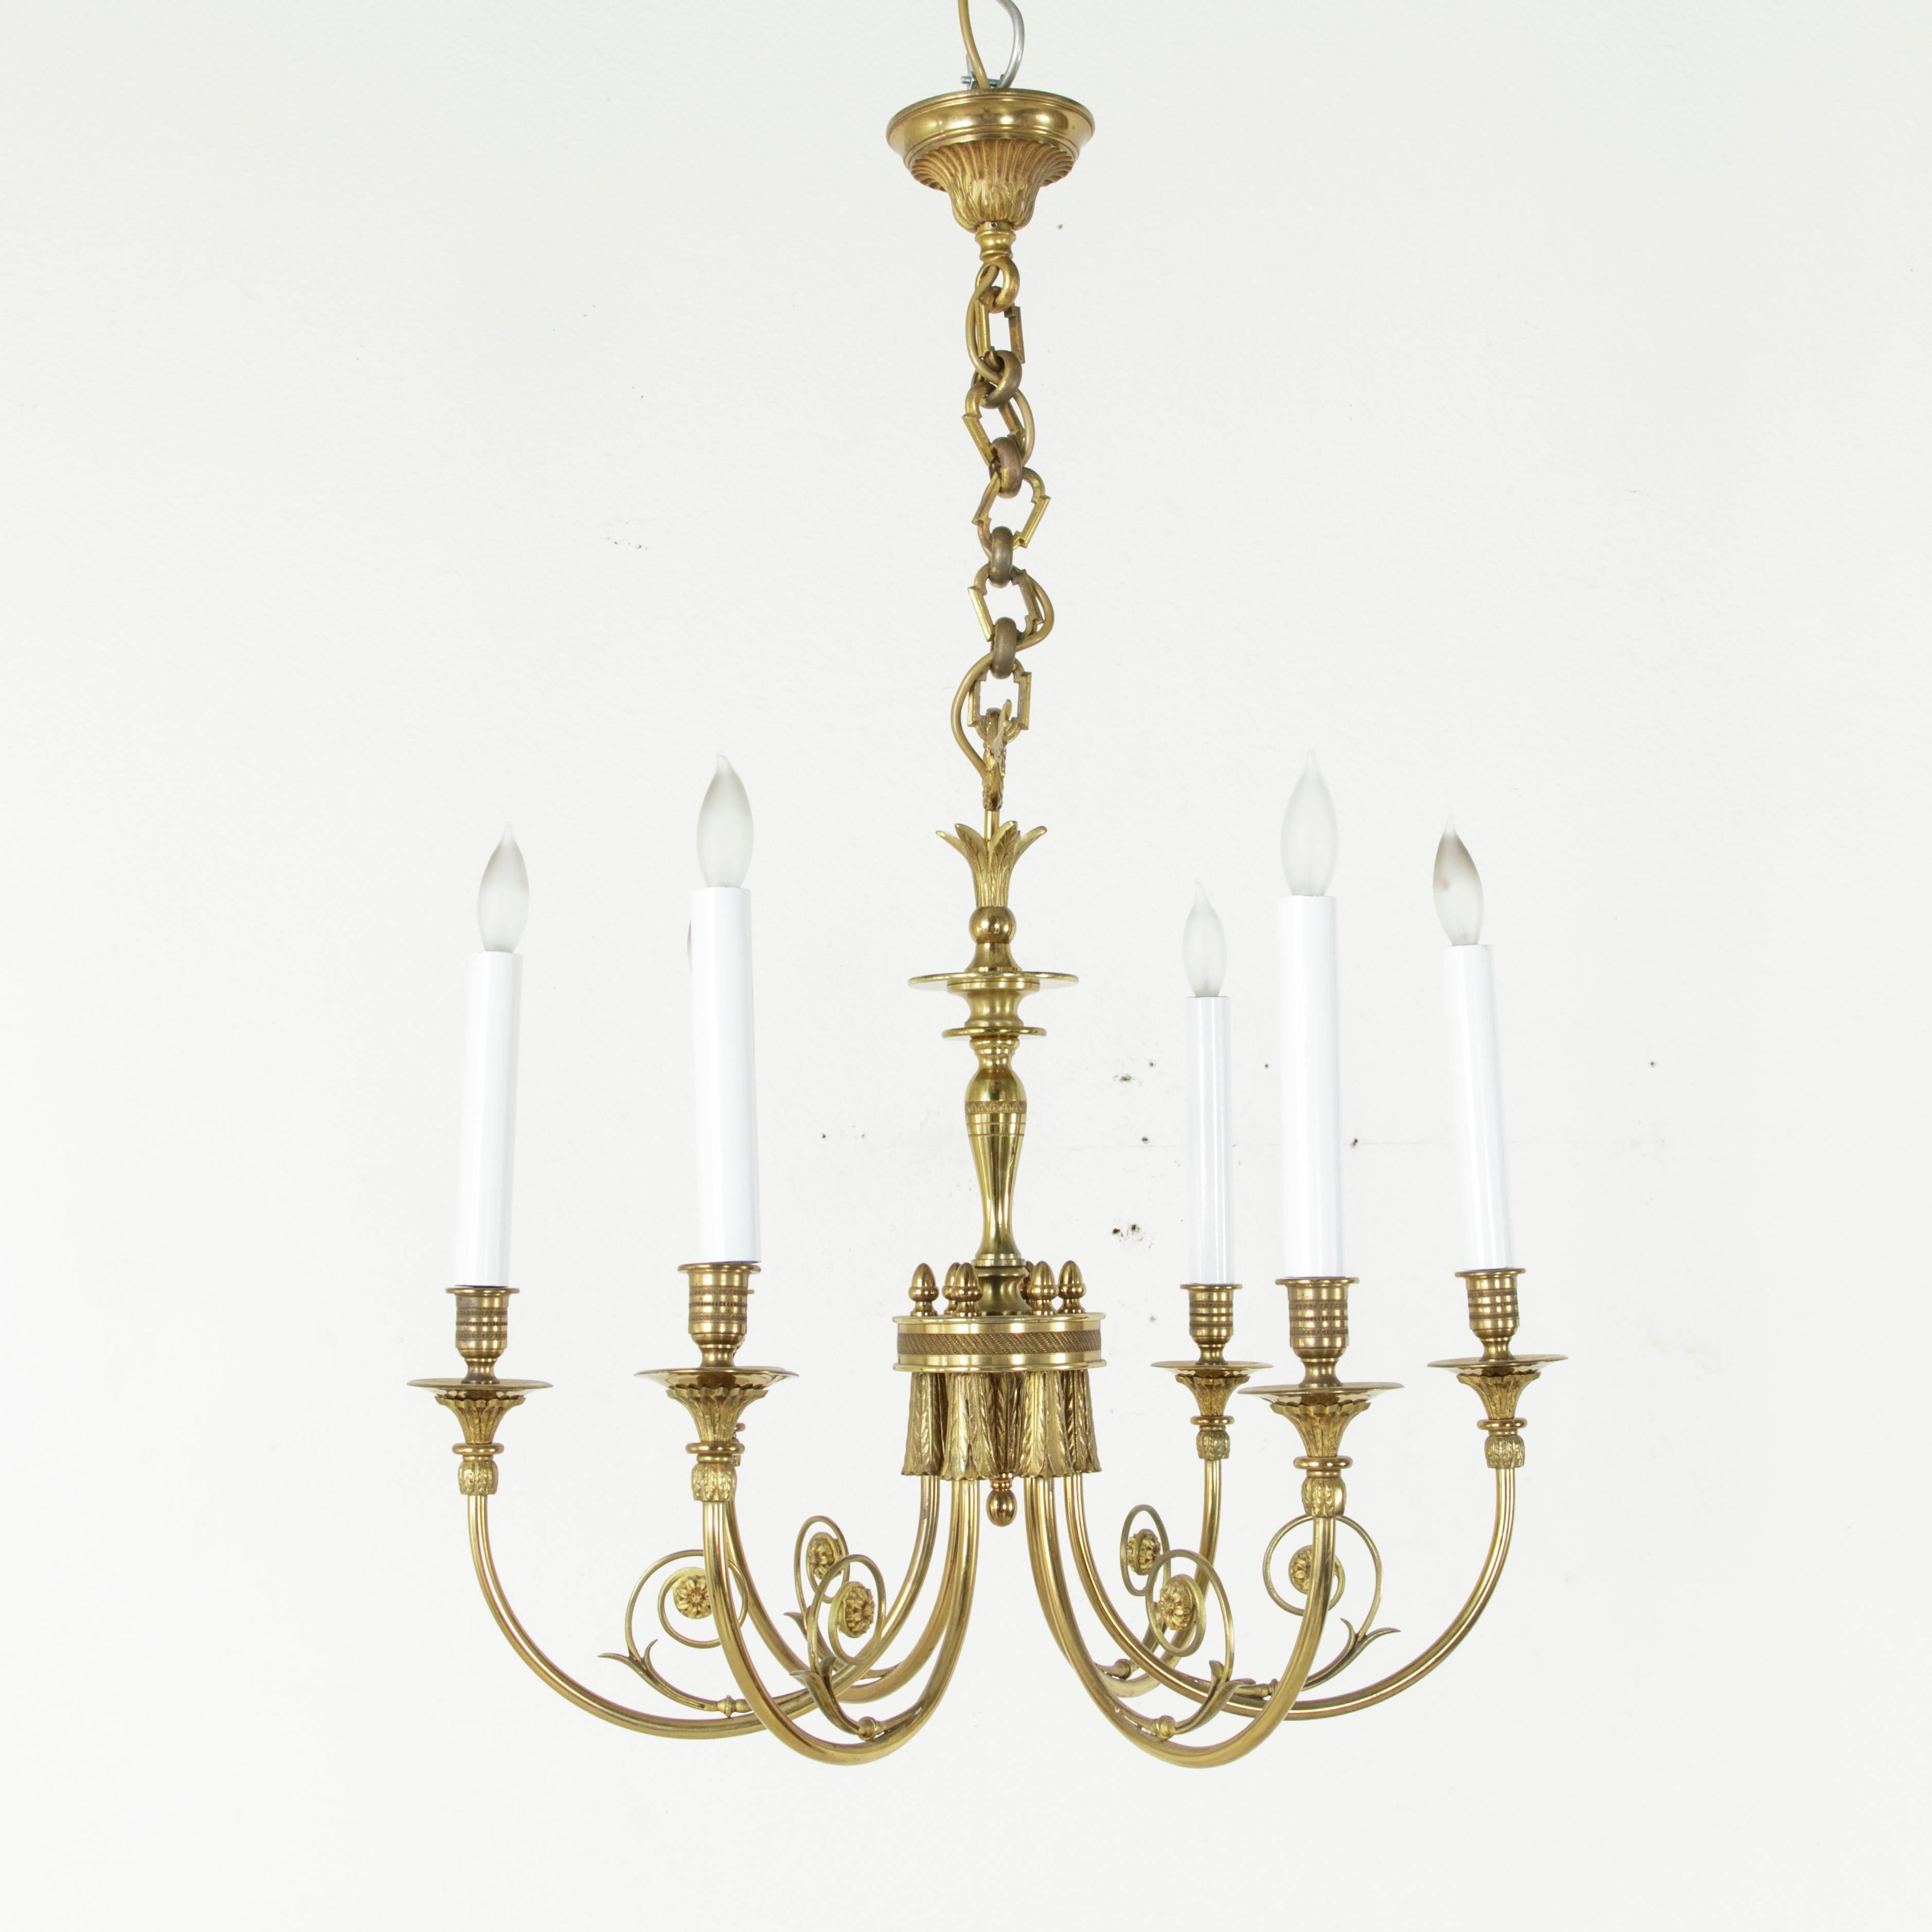 20th Century French Directoire Style Bronze Chandelier with Arrow Motif and Six Lights